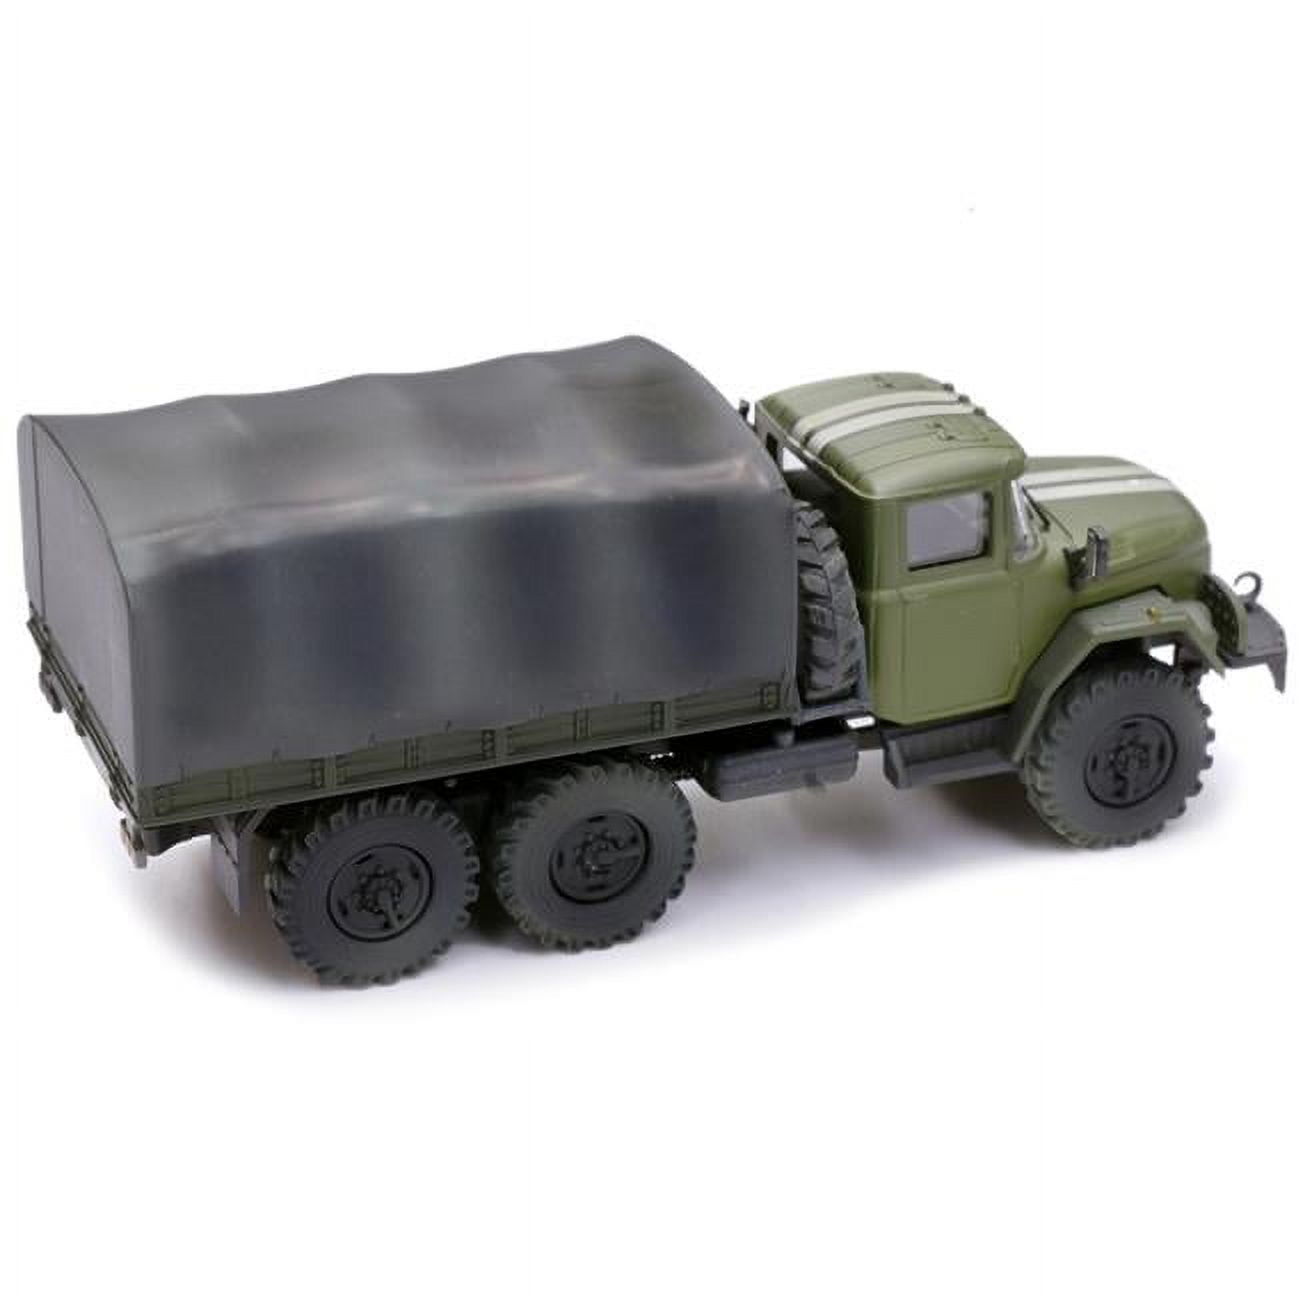 ZIL 131 Cargo Truck Green with White Stripes Ukrainian Ground Forces 1-72 Scale Diecast Model -  Agilidad, AG2950081